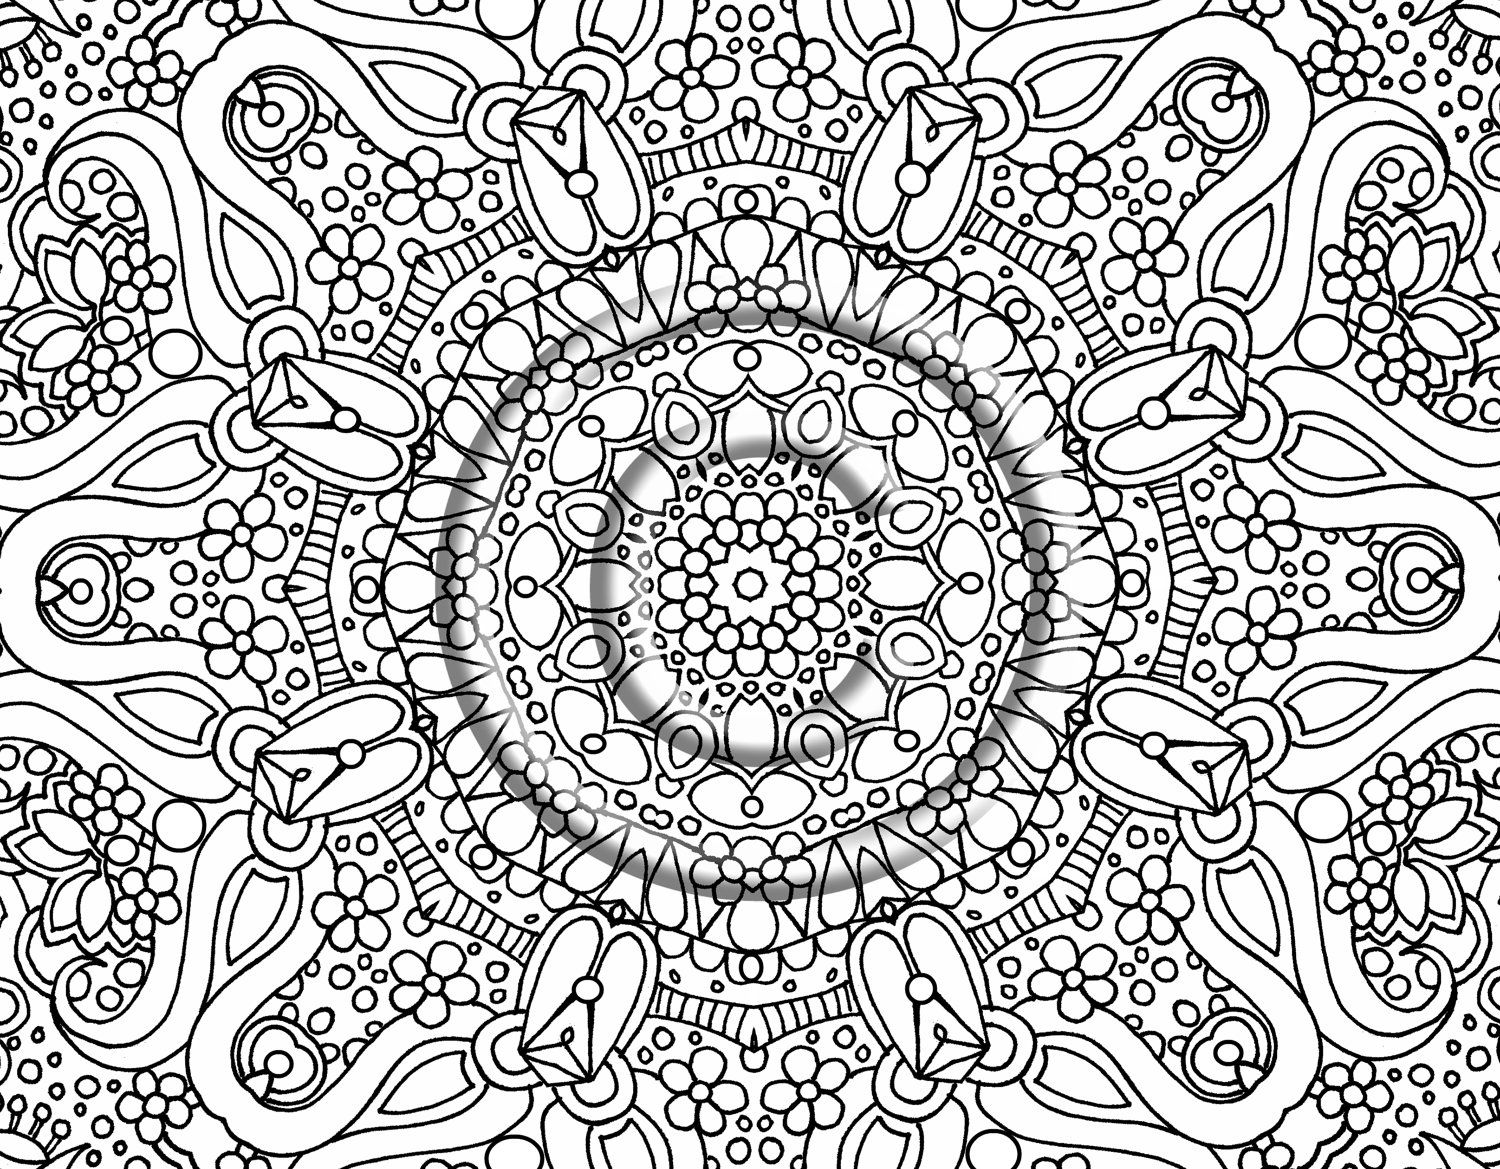 Free Abstract Coloring Pages To Save Image 24 - VoteForVerde.com